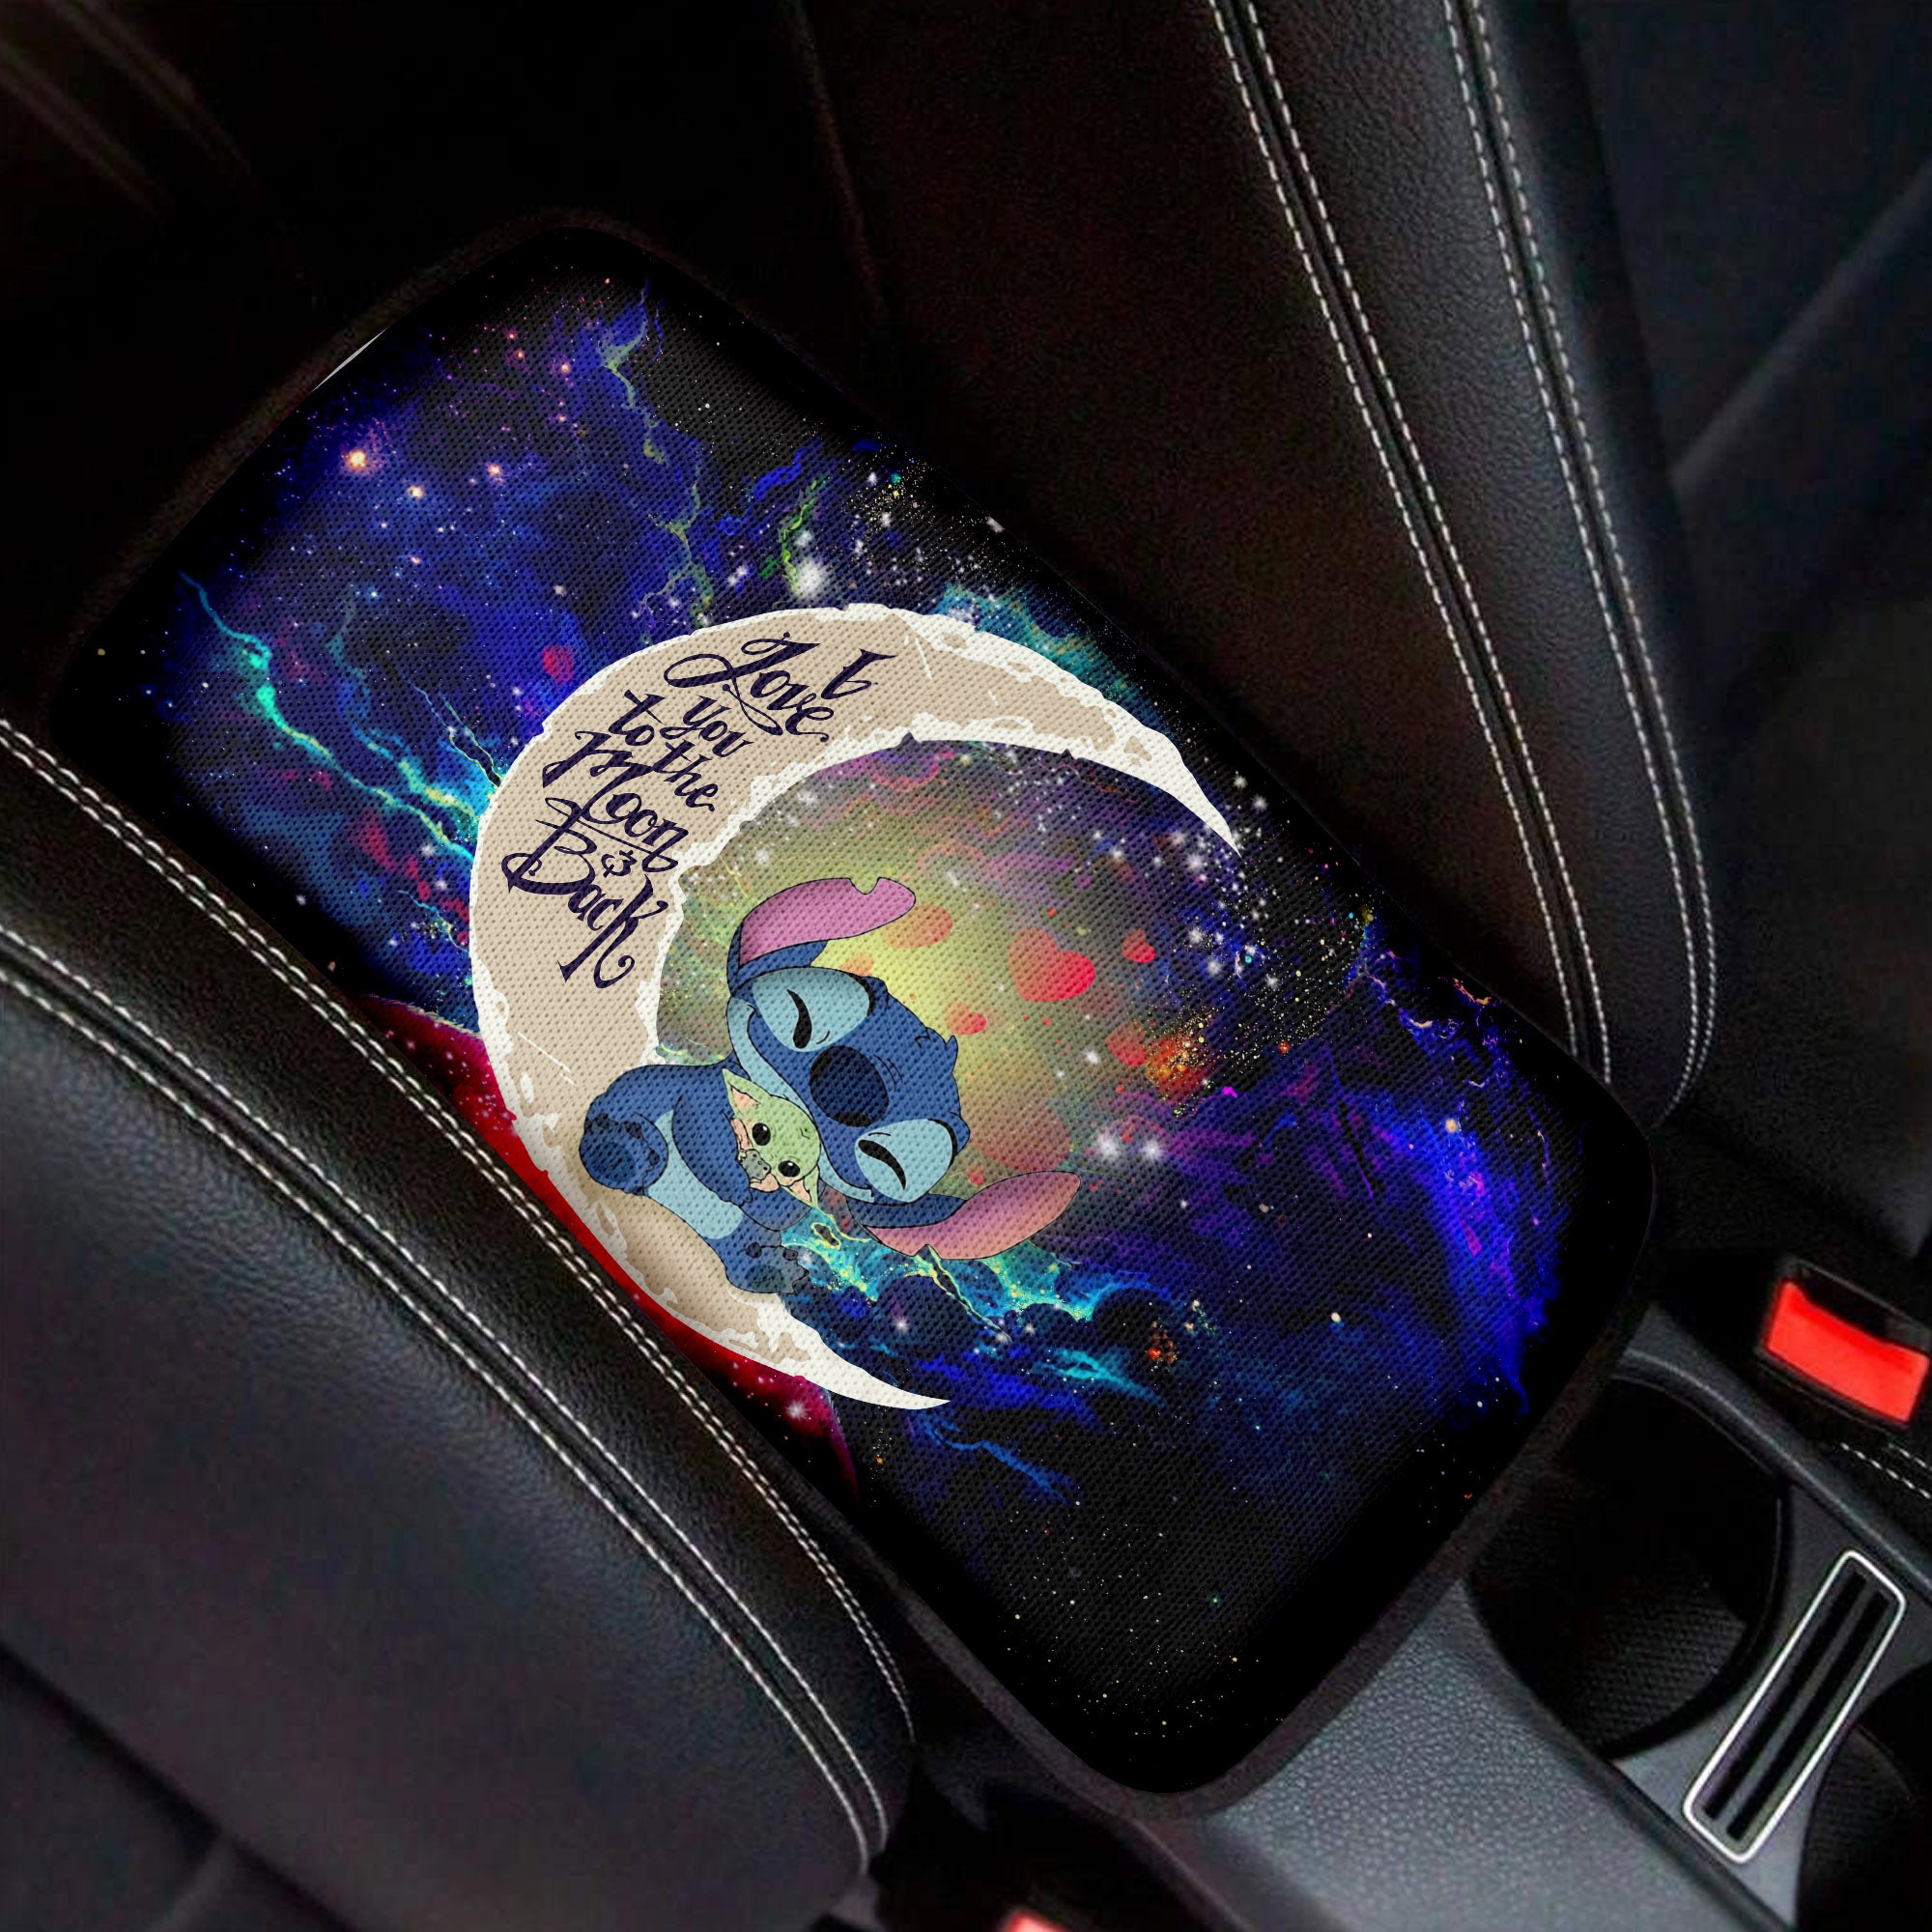 Stitch Hold Baby Yoda Love To Moon Back Galaxy Premium Custom Armrest Center Console Cover Car Accessories Nearkii